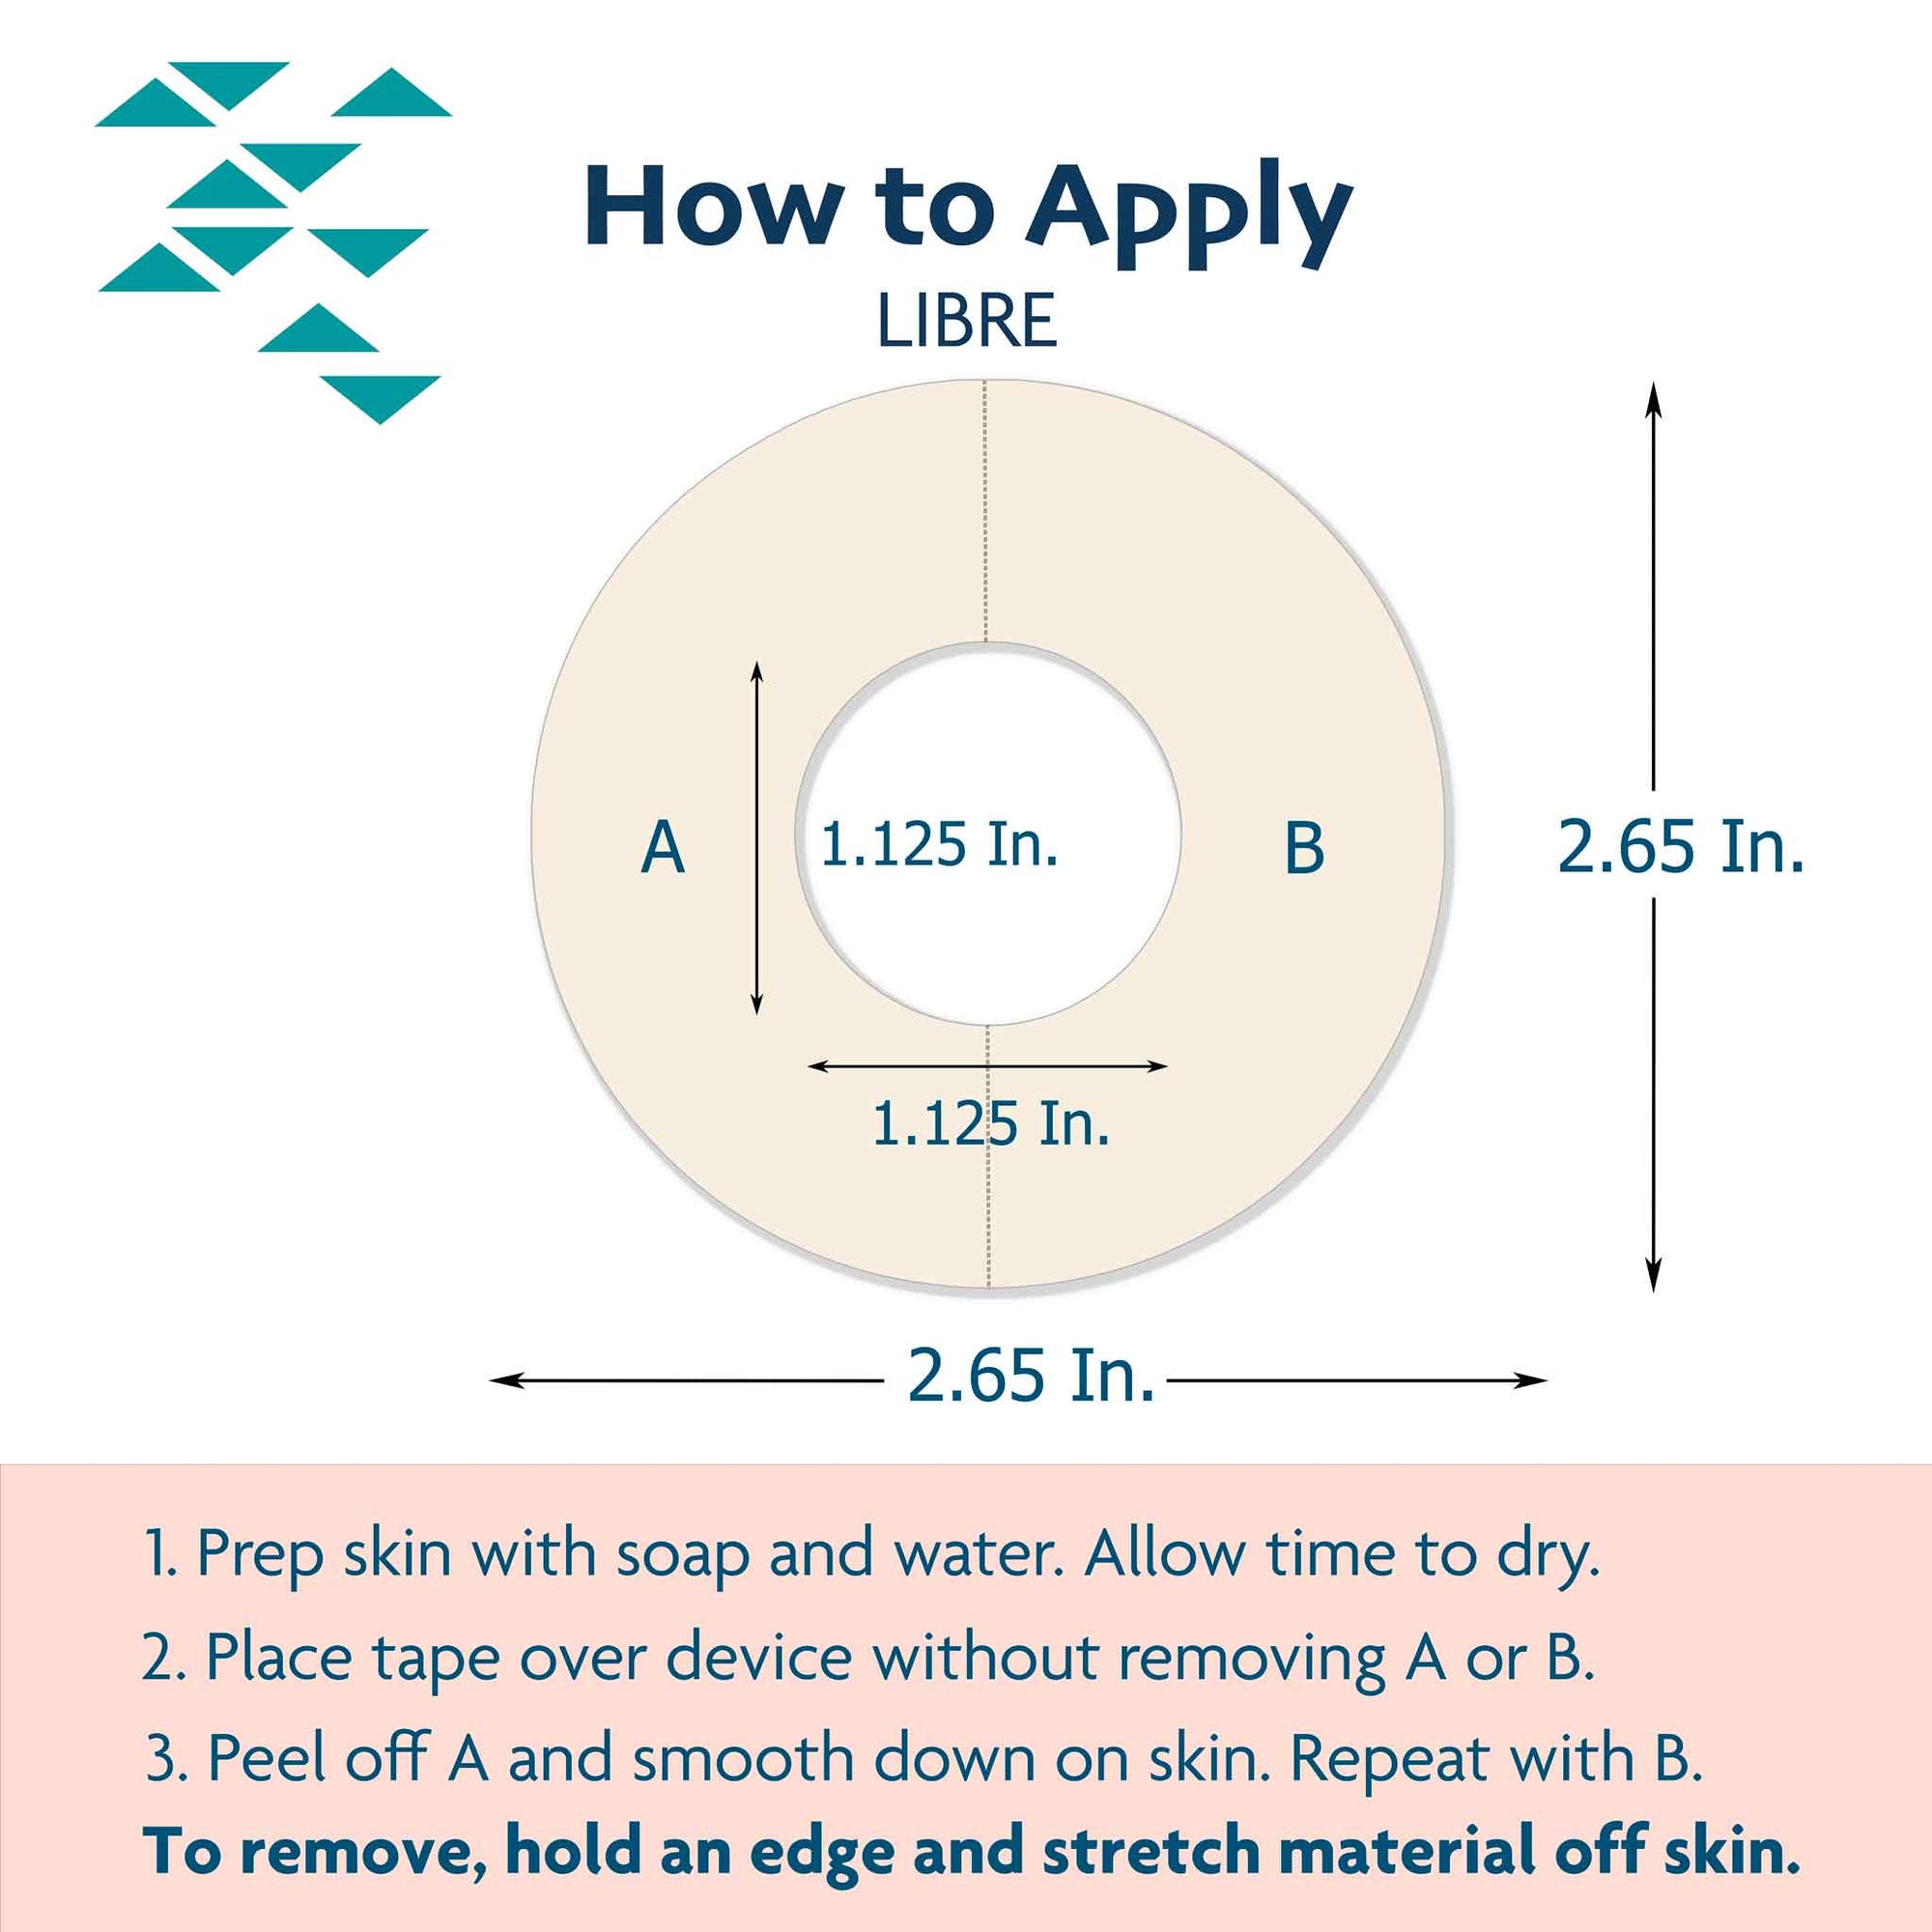 Libre Patch application instructions to secure your CGM Properly